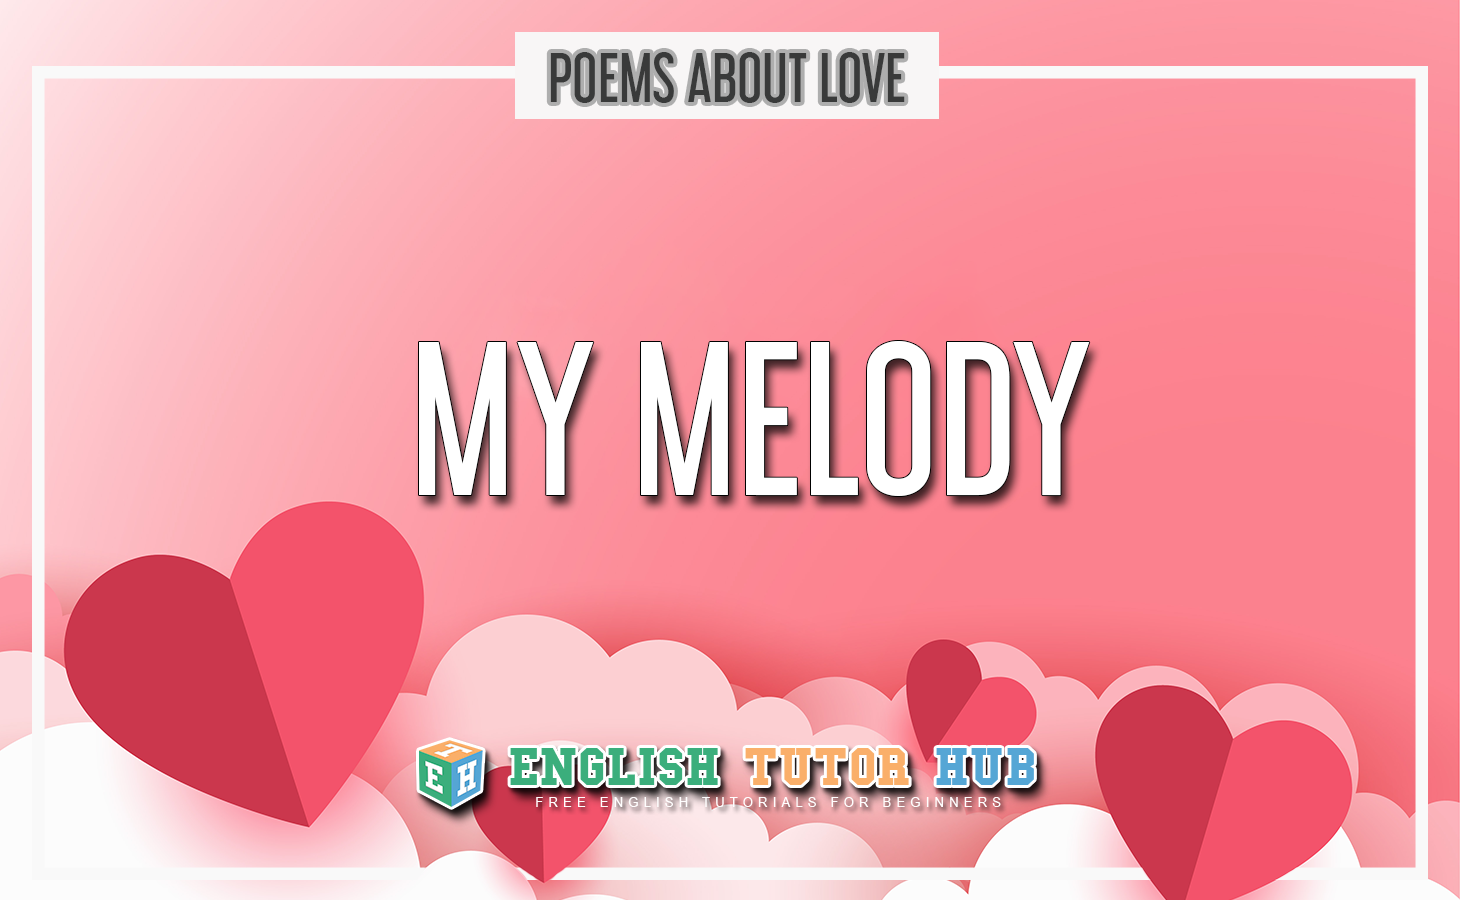 My Melody - Poem About Love Summary and Lesson [2022]